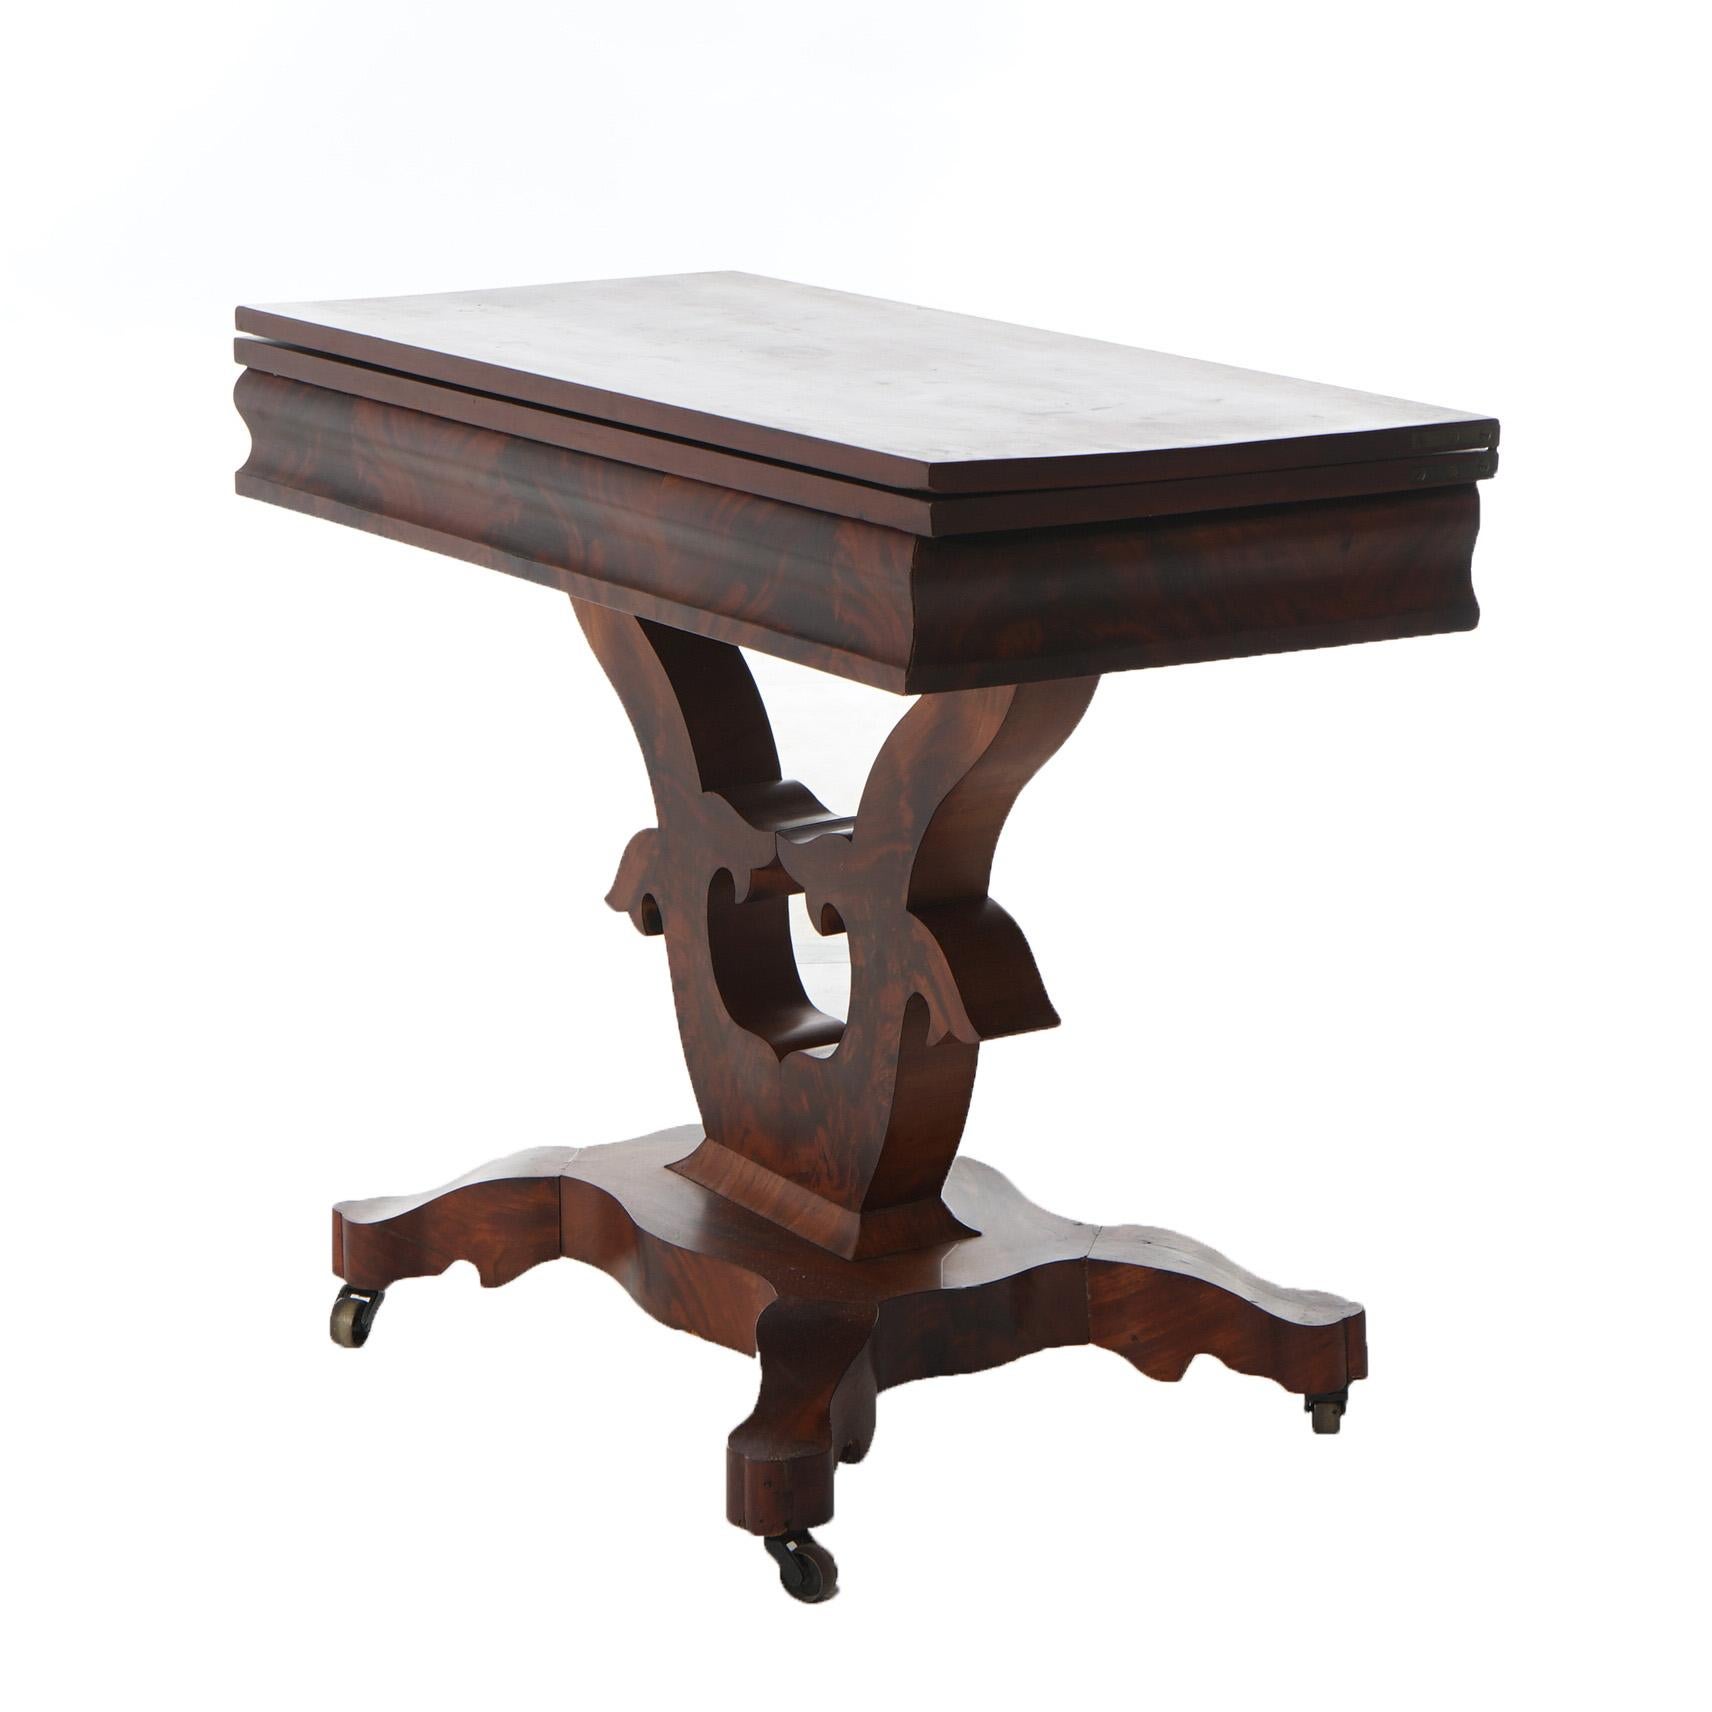 Antique American Empire Neoclassical Greco Flame Mahogany Card Table C1840 For Sale 3